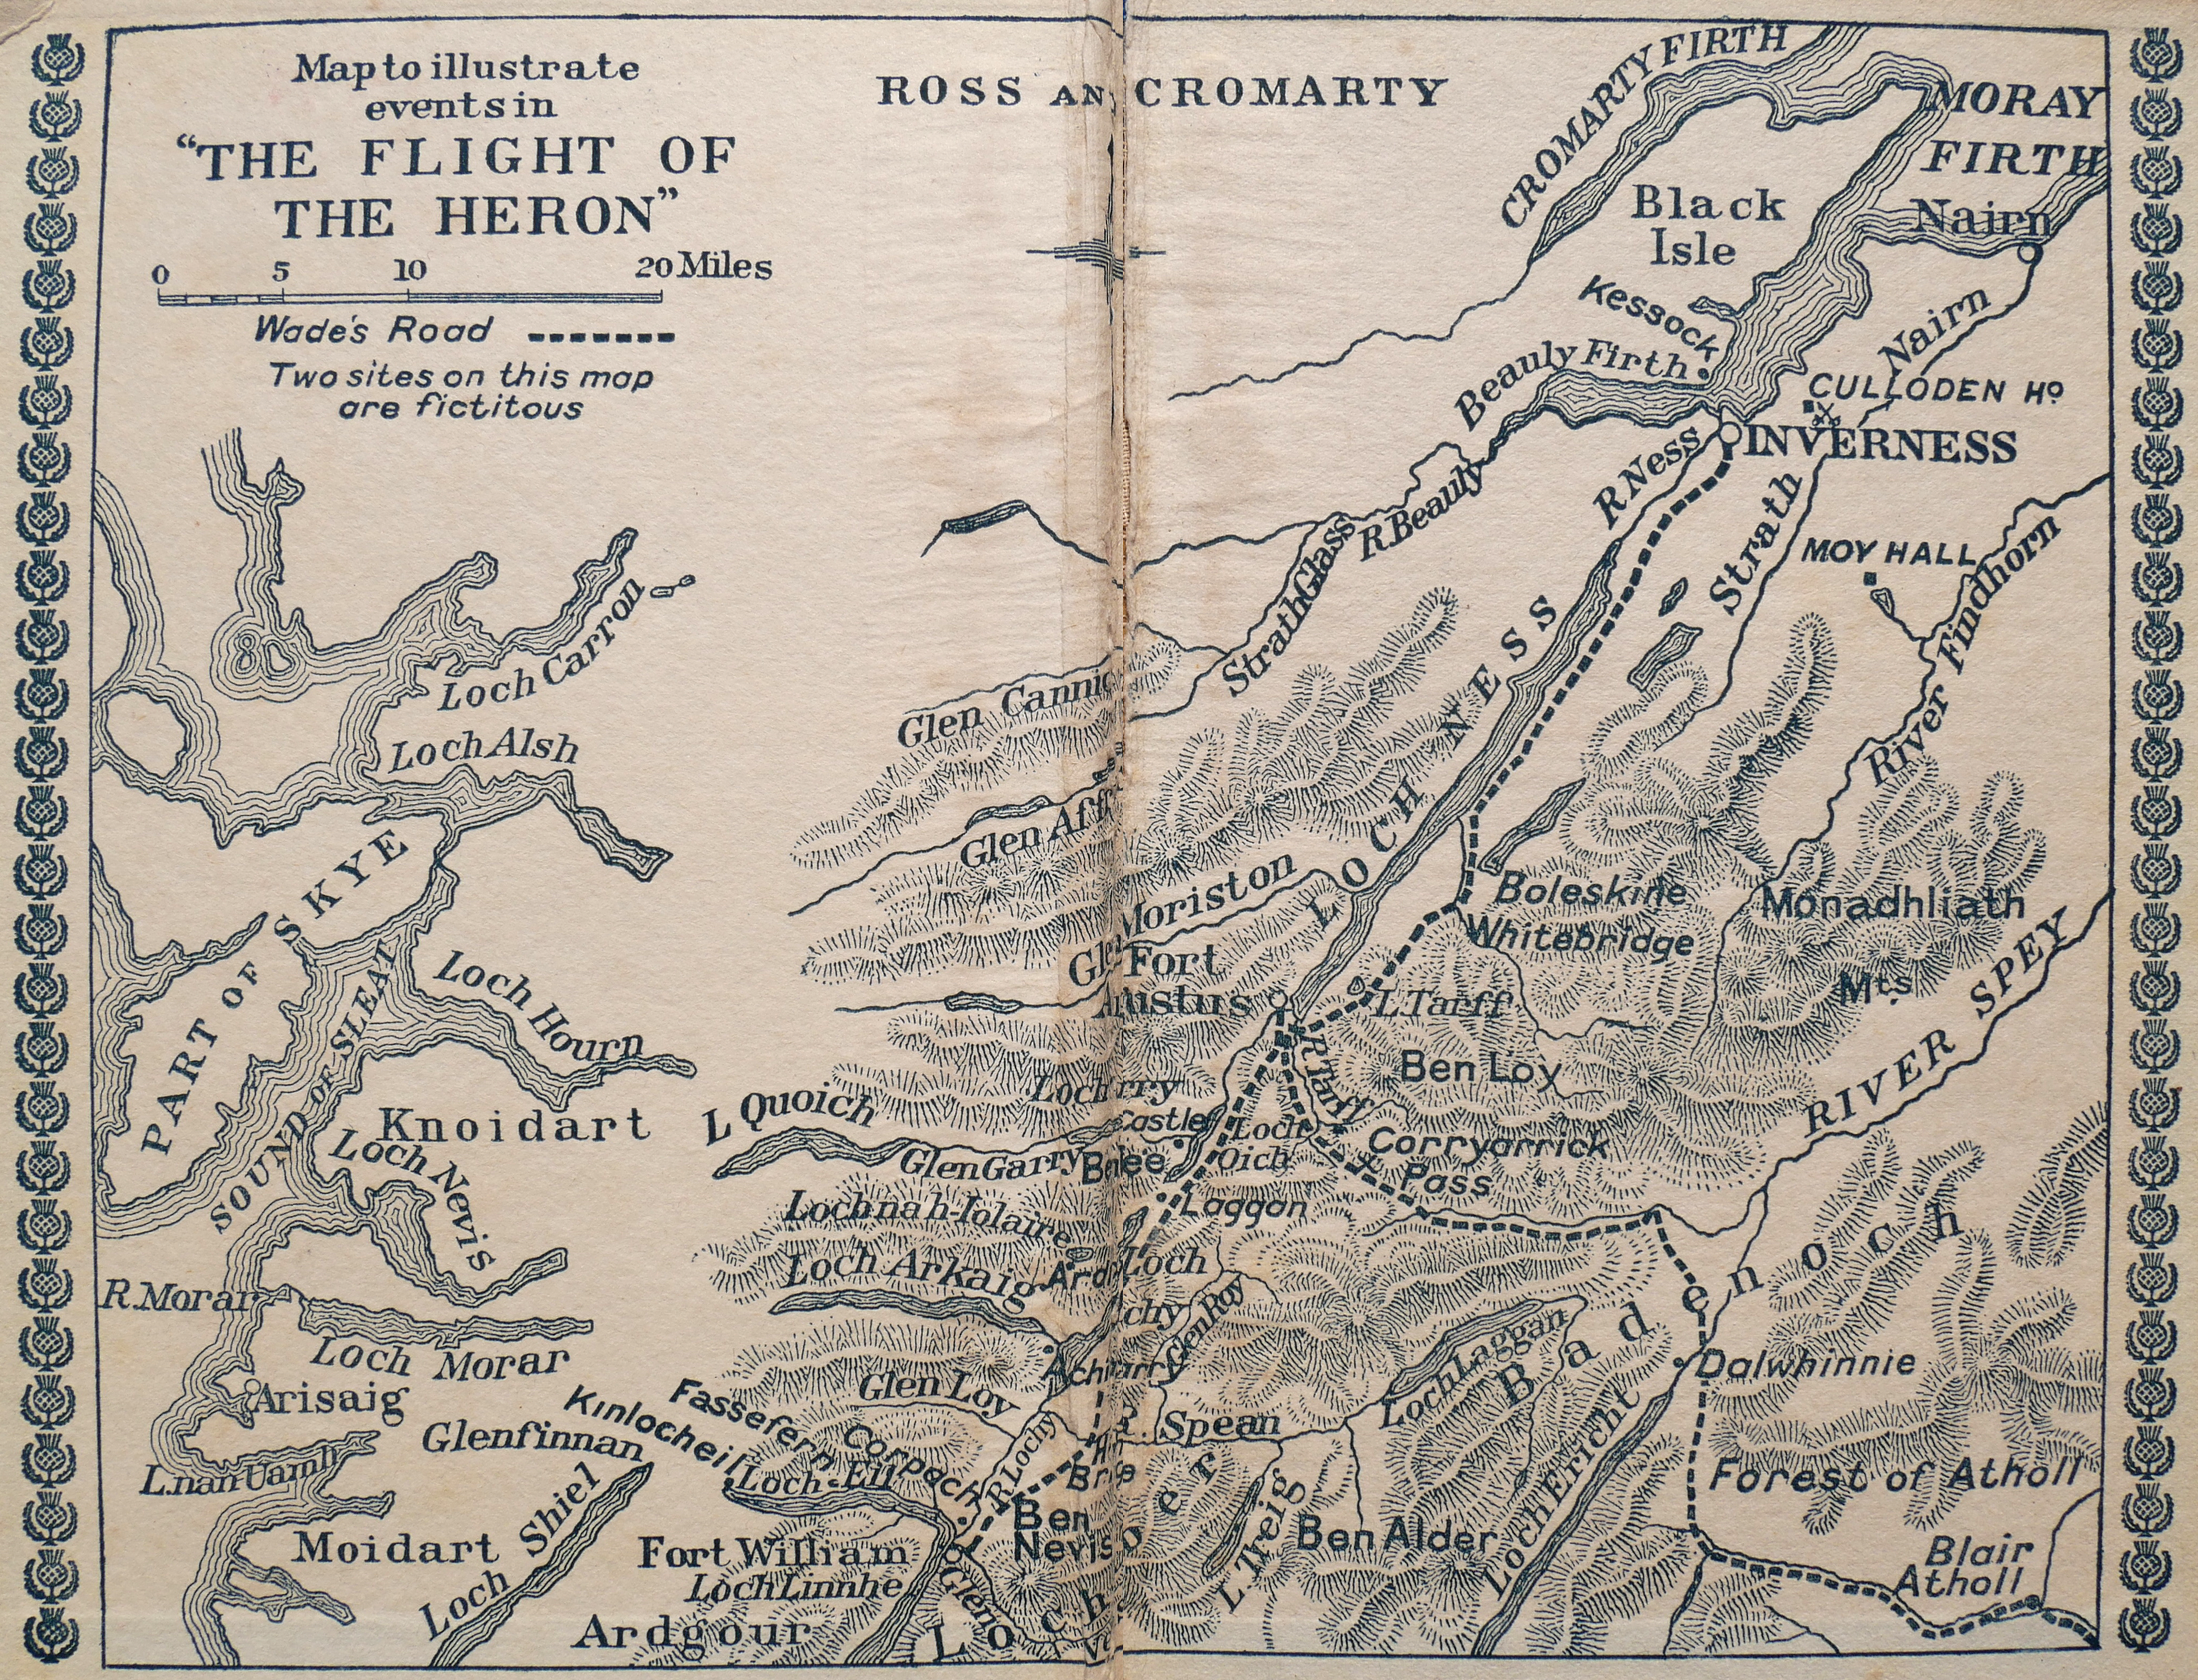 Map to illustrate events in “The Flight of the Heron”. The map shows the Great Glen and the Western Highlands of Scotland, with two fictitious locations added: ‘Ardroy’, to the northeast of Loch Arkaig, and ‘Ben Loy’, north of the Corryarrick (Corrieyairack) Pass.